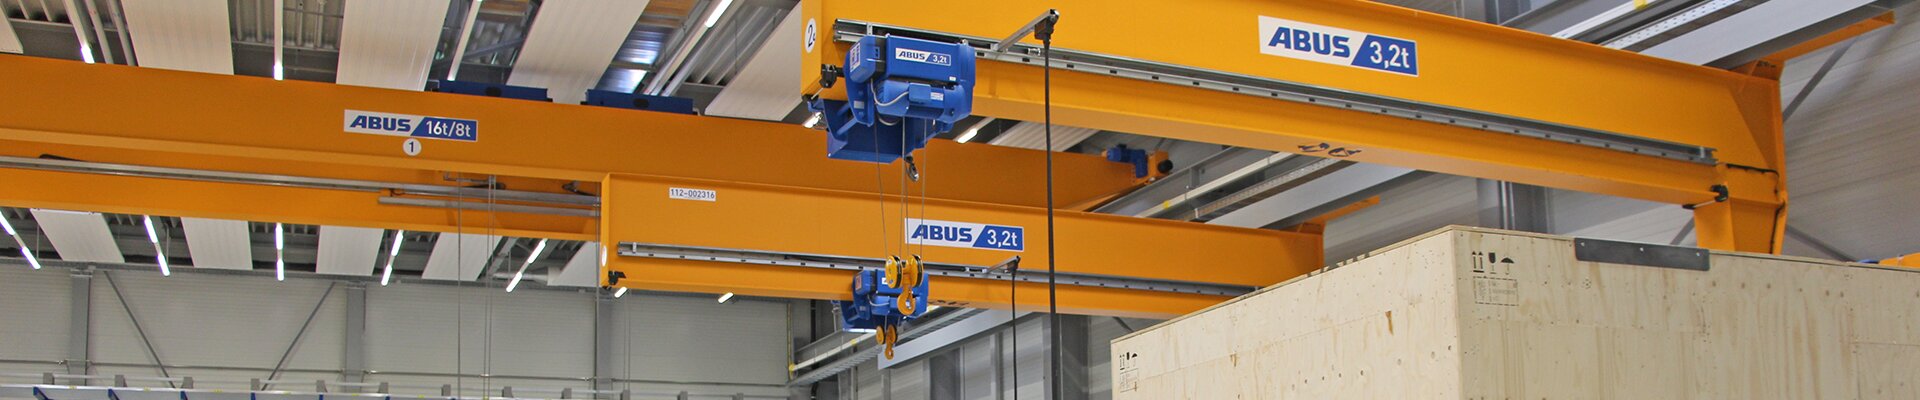 Working with ABUS cranes in parallel at one workplace in the company Bitzer